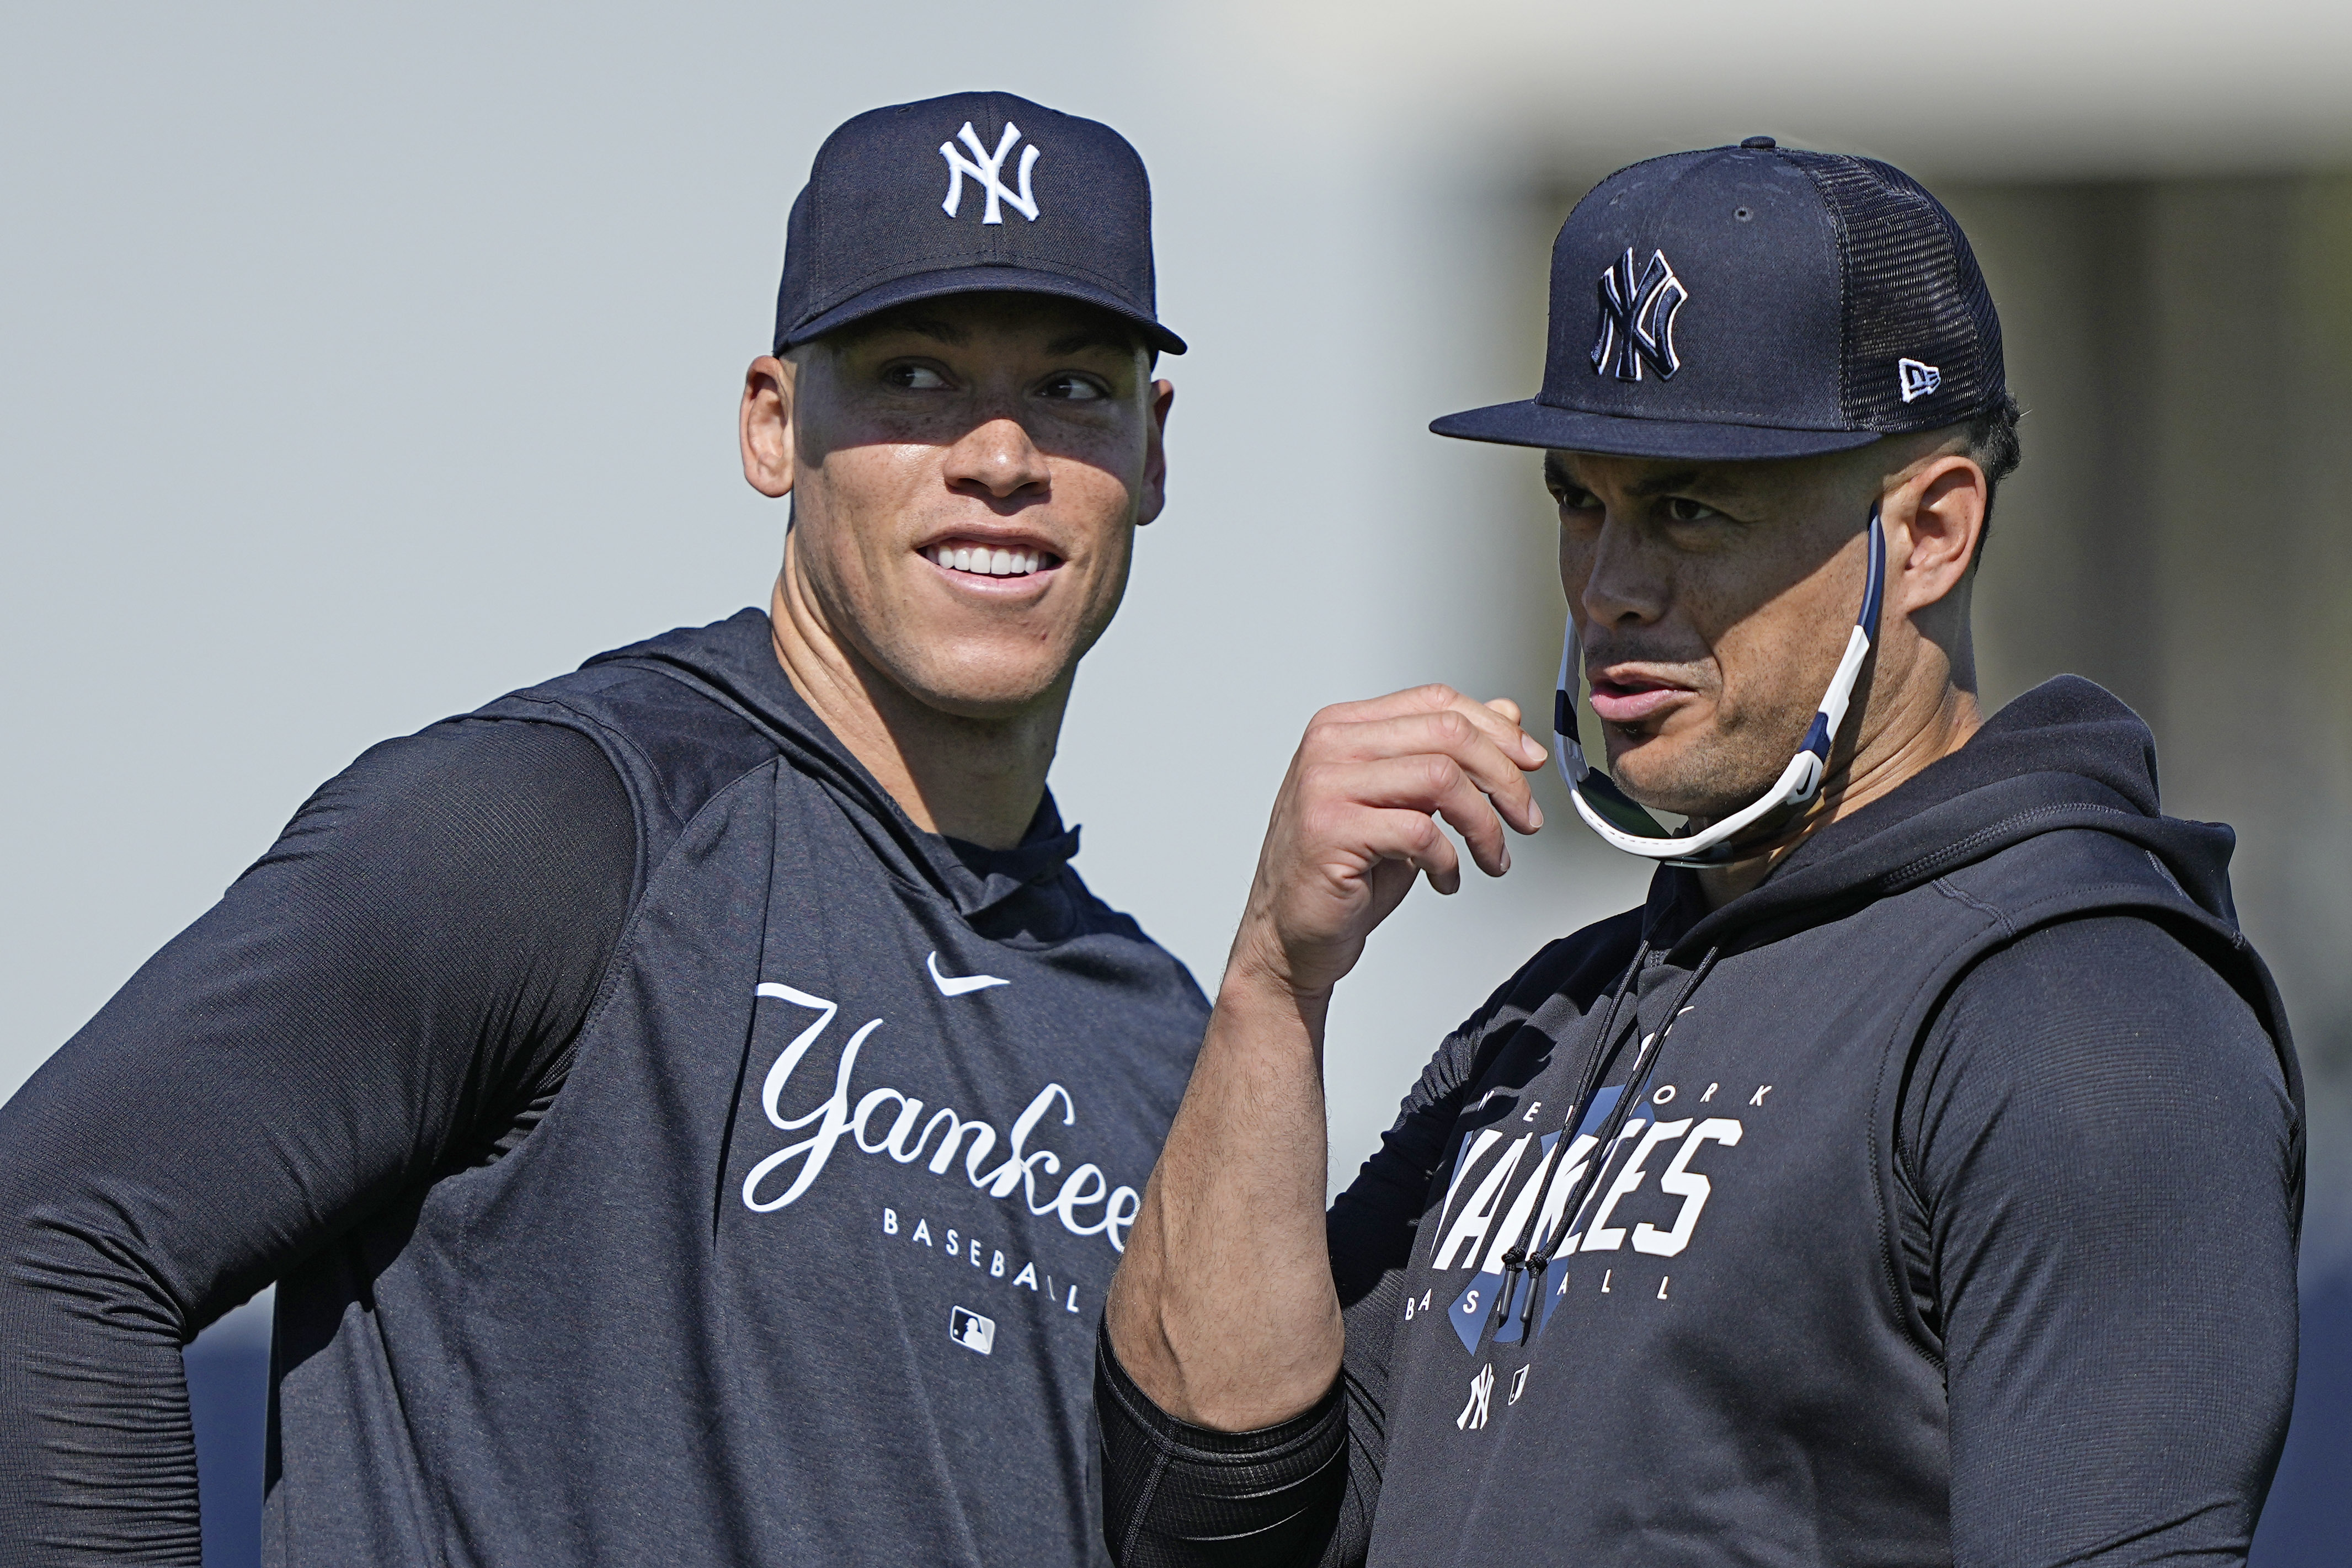 New York Yankees' Giancarlo Stanton to play outfield vs. Red Sox